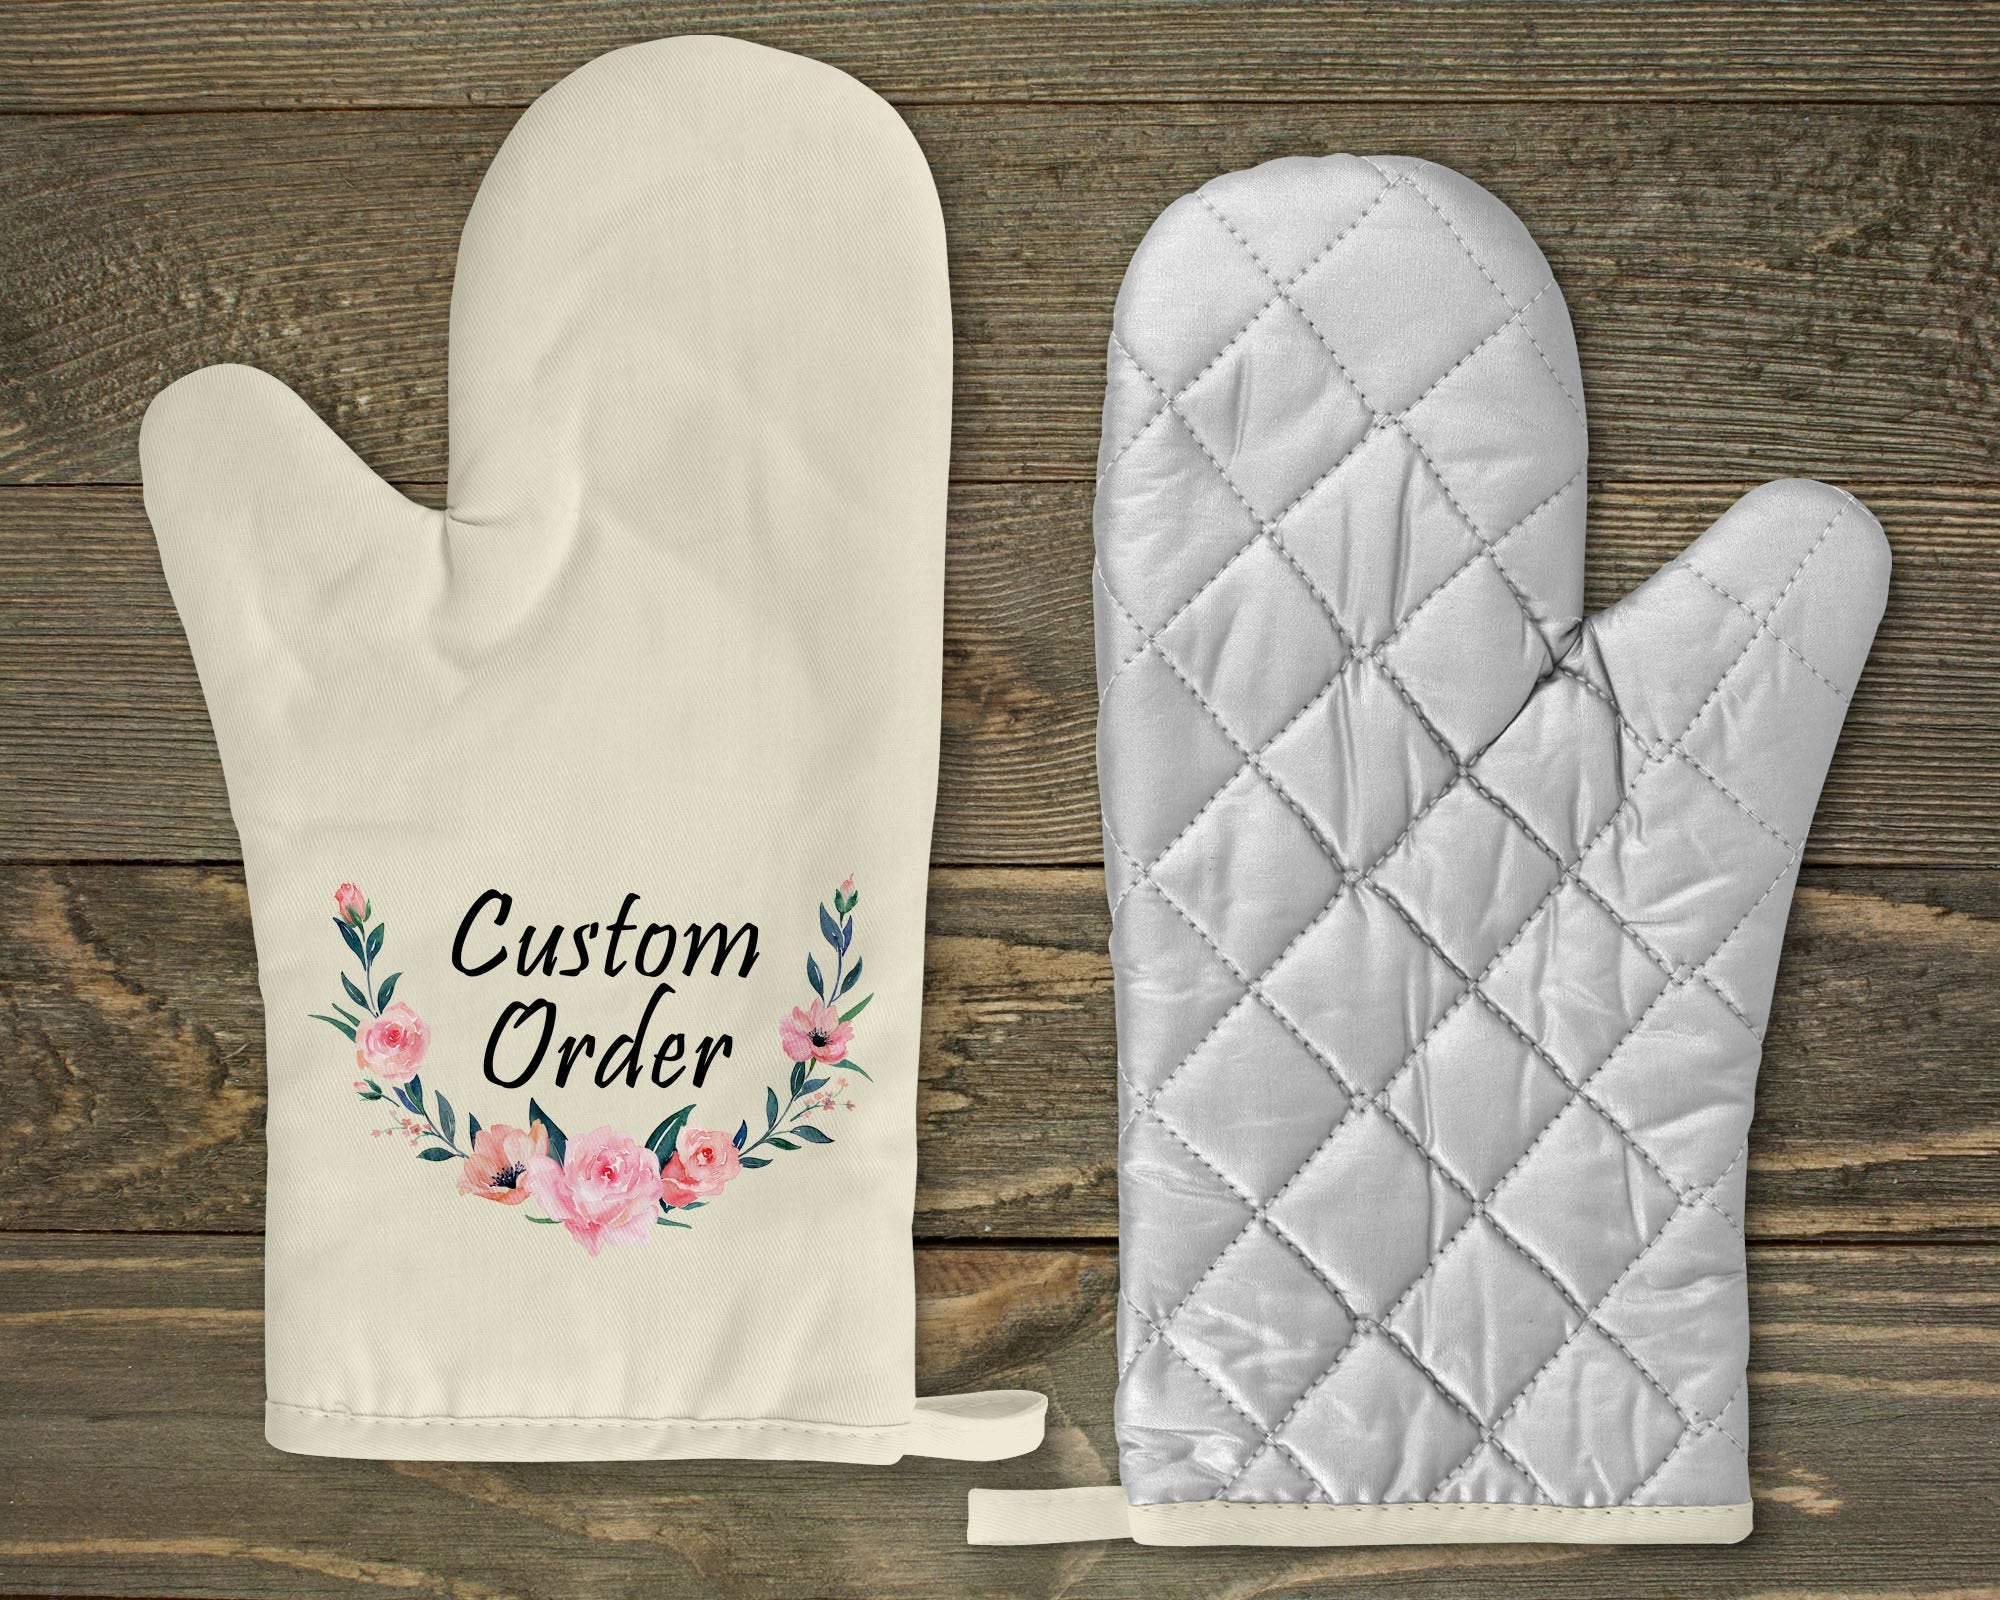 Sublimation Blank Oven Glove